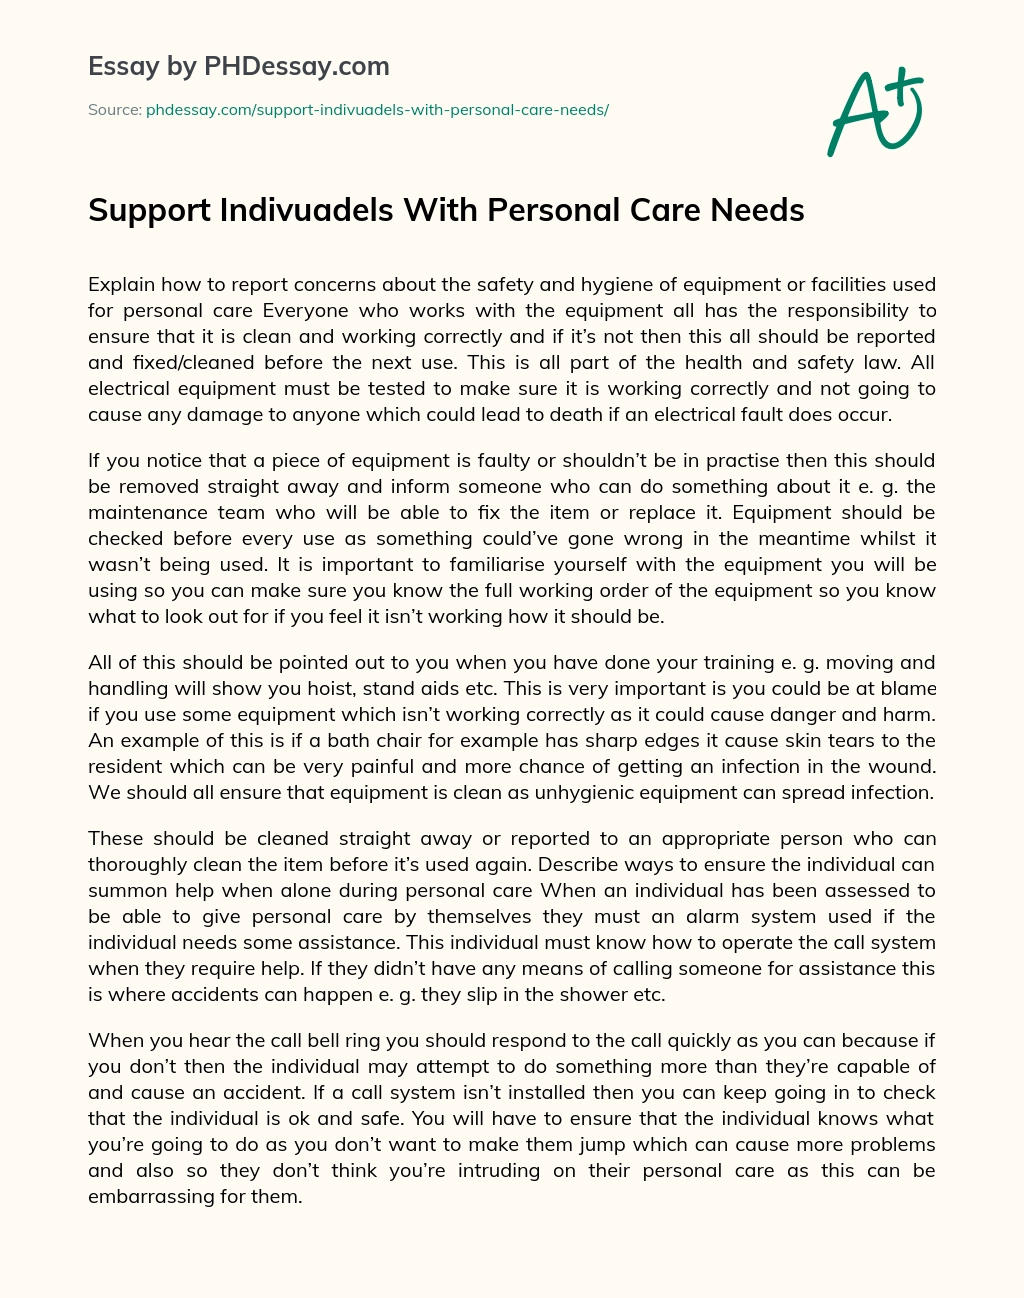 Support Indivuadels With Personal Care Needs essay